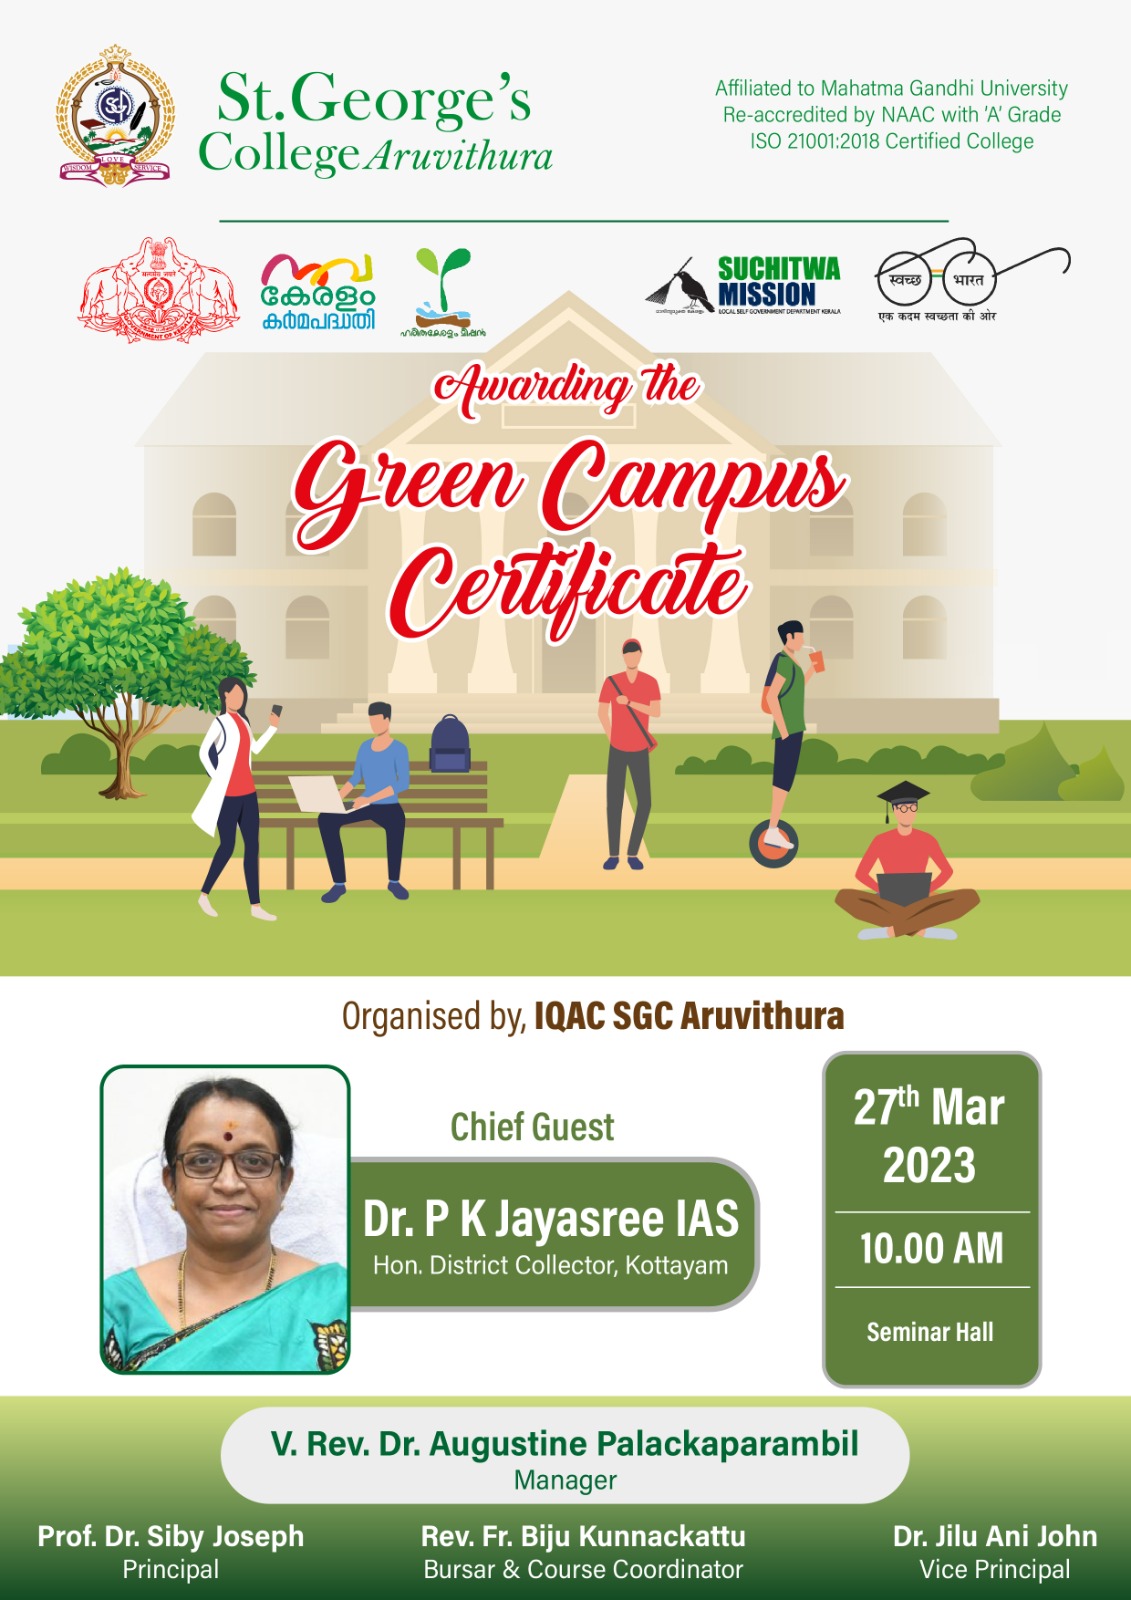 Green Campus Certificate awarding ceremony